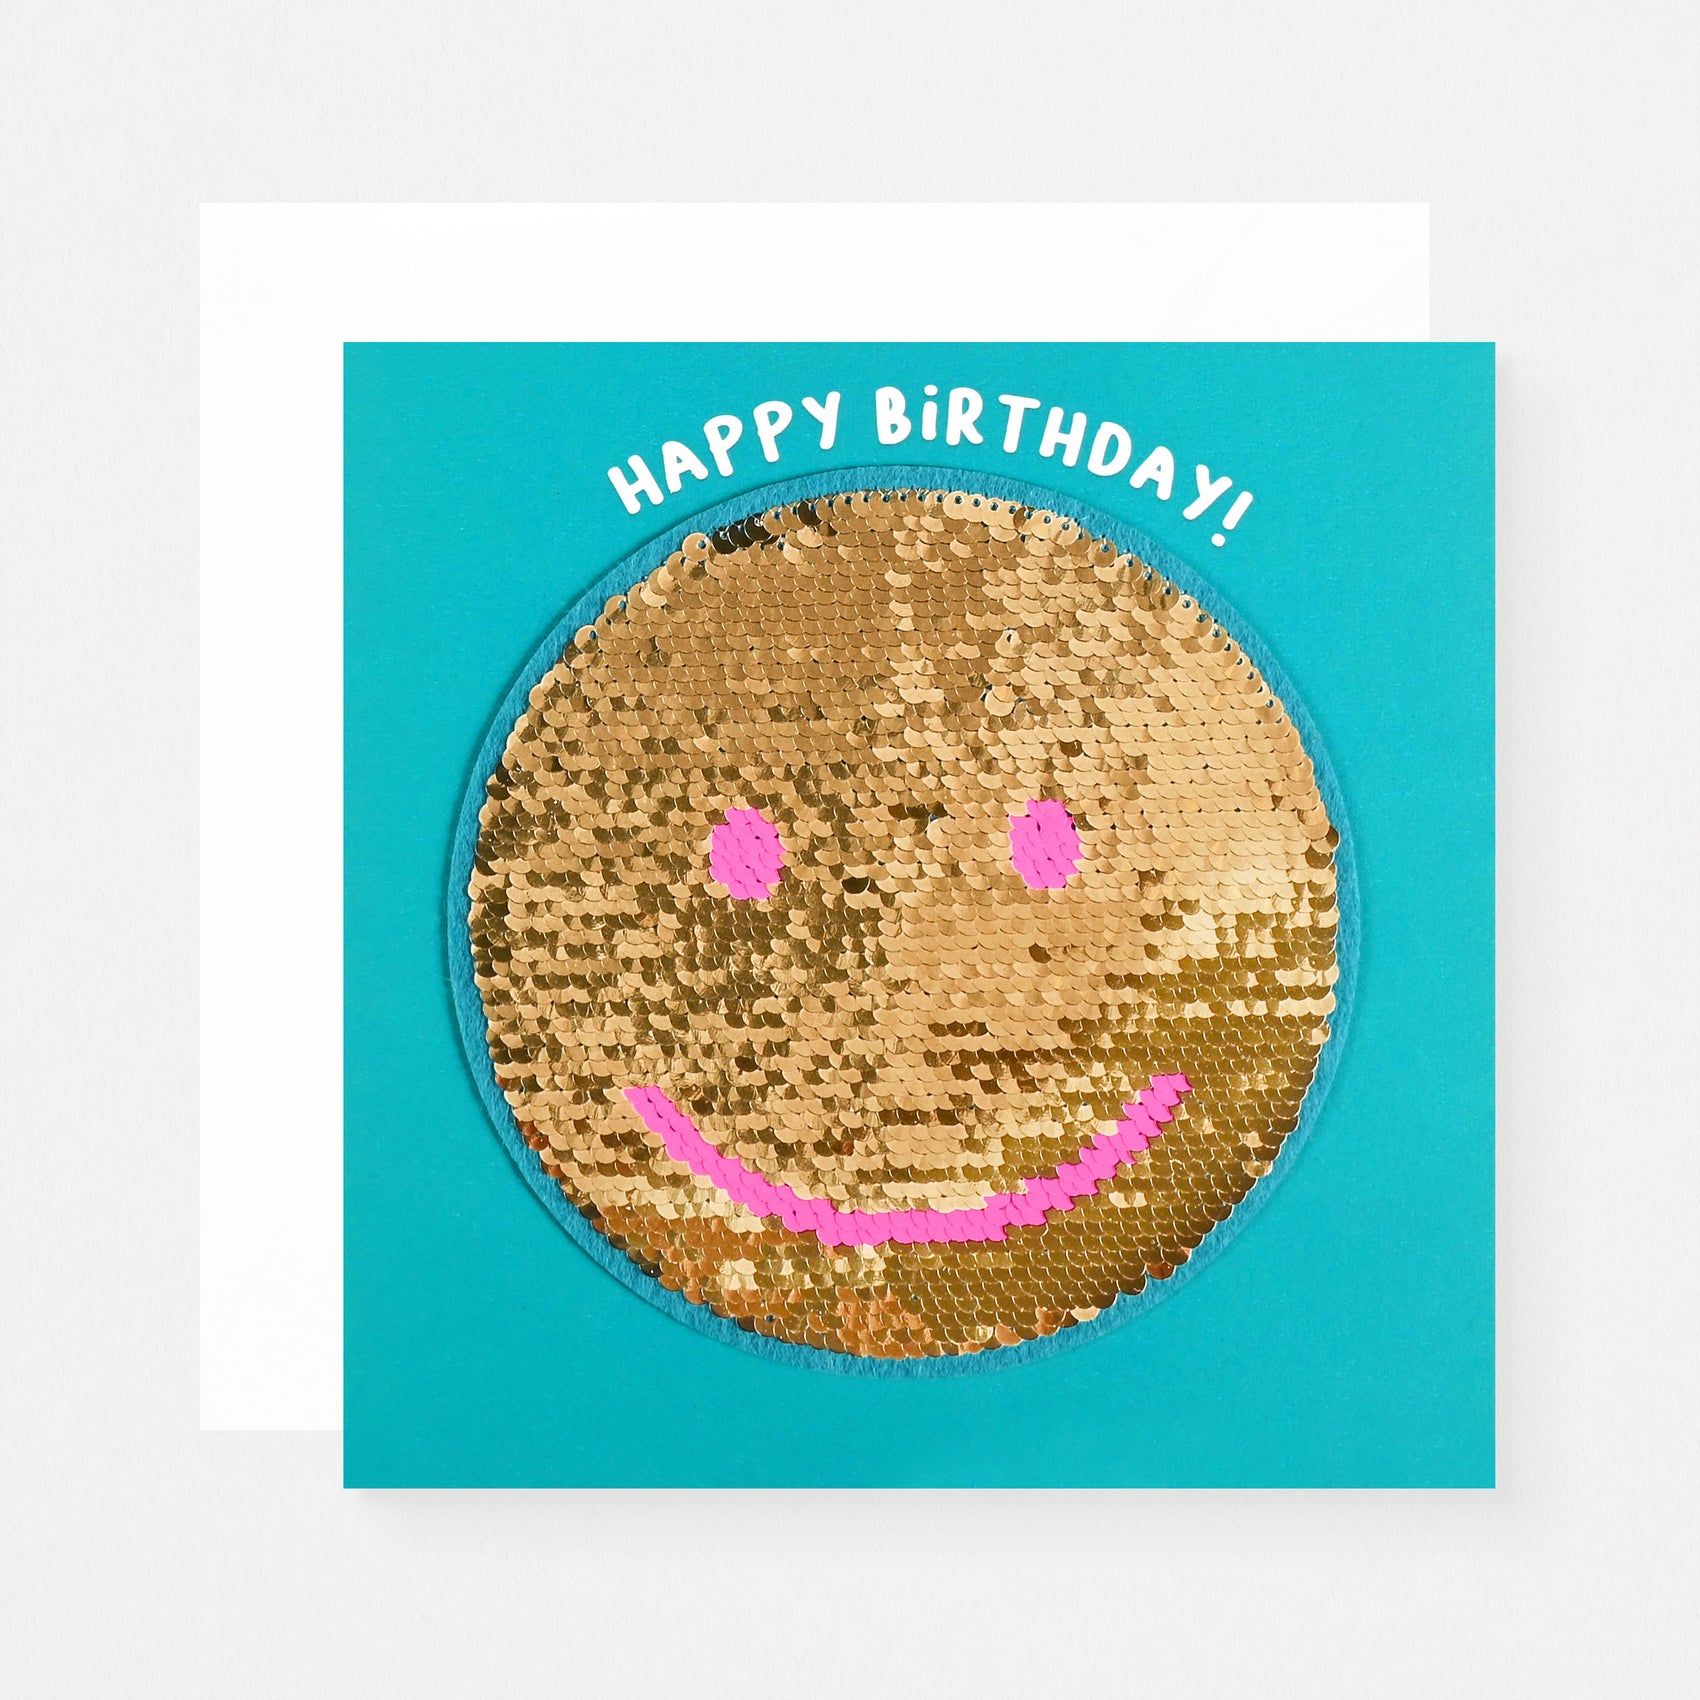 Smiley Birthday Card With Reusable Adhesive Sequin Patch